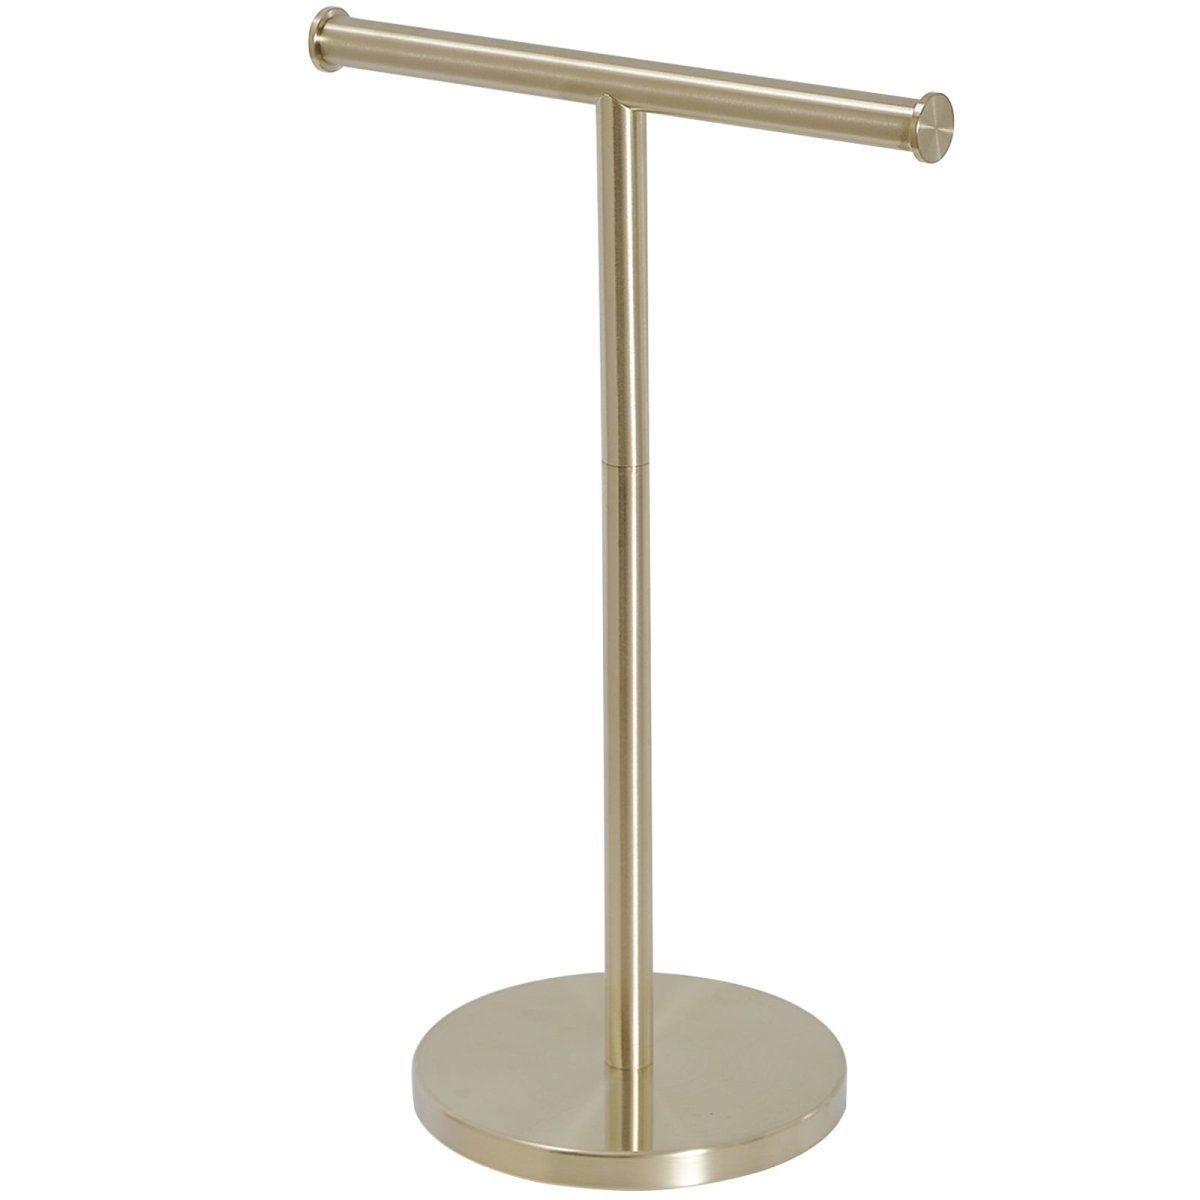 Toilet Paper Holder with Steady T-Shape Towel Rack in Gold - buyfaucet.com